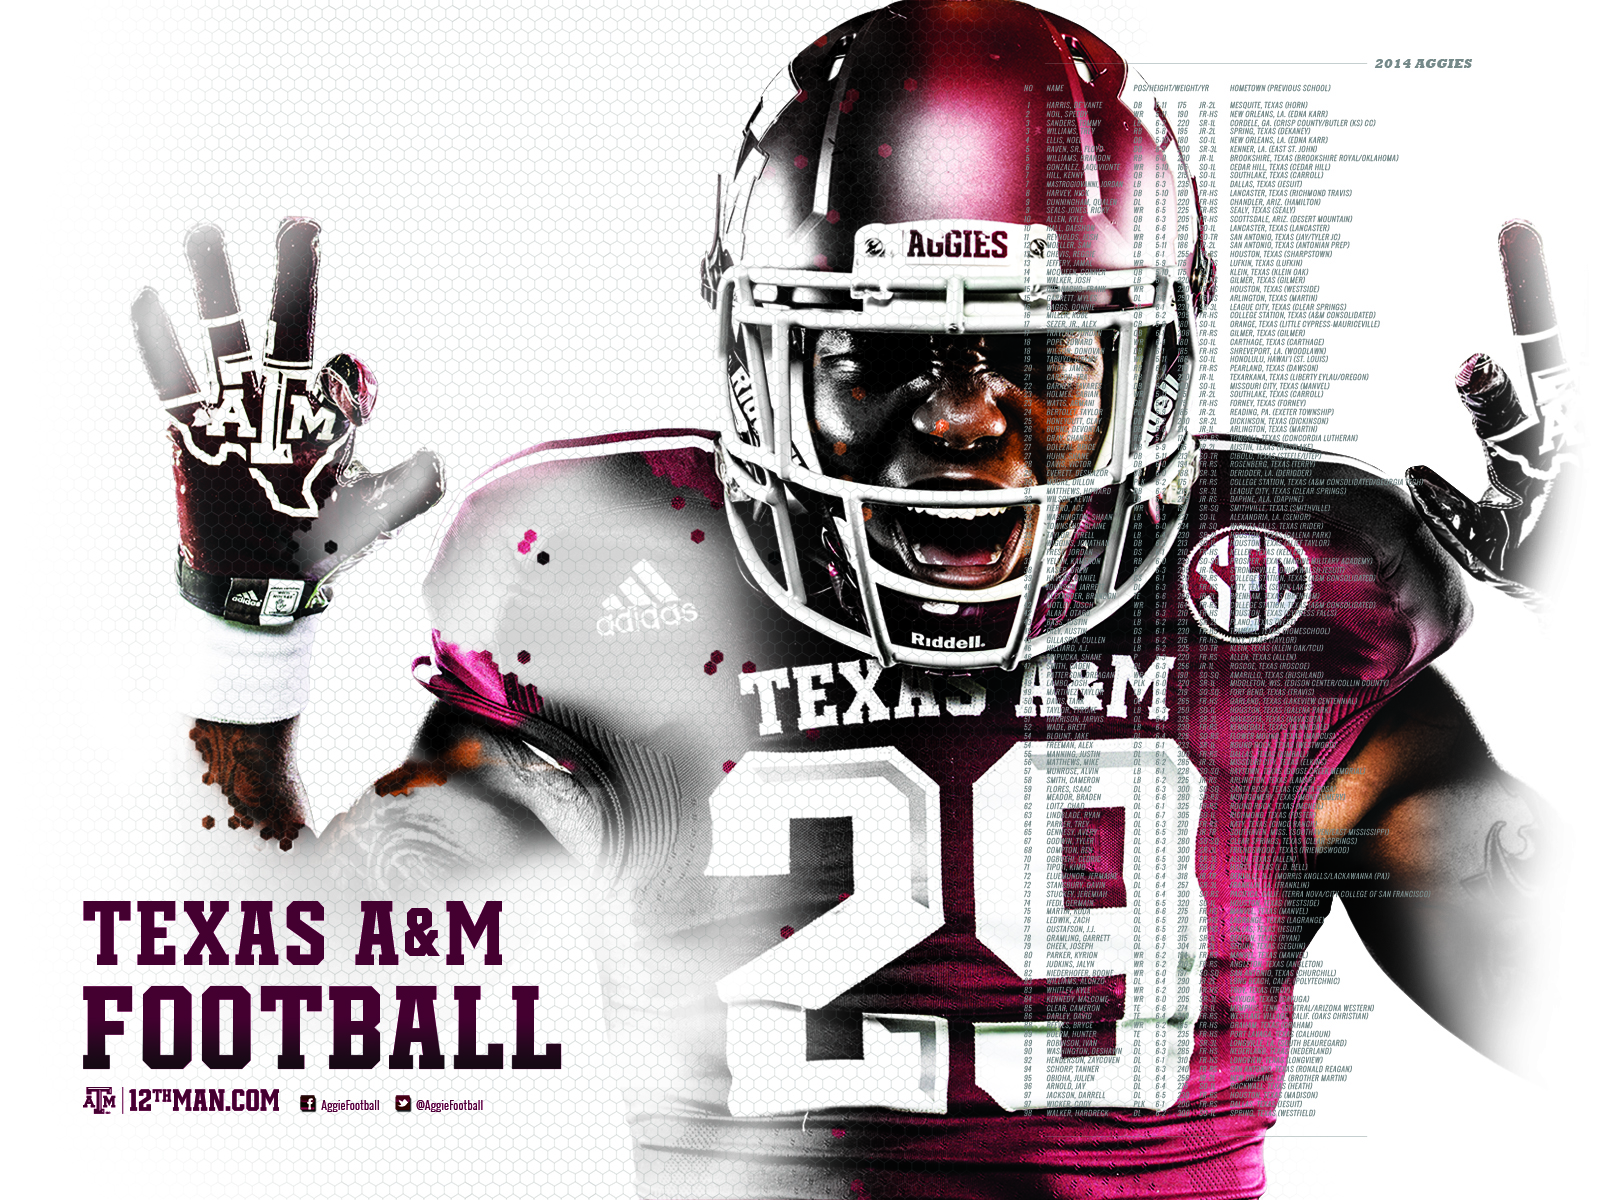 Texas AM Downloads for Every Aggies Fan